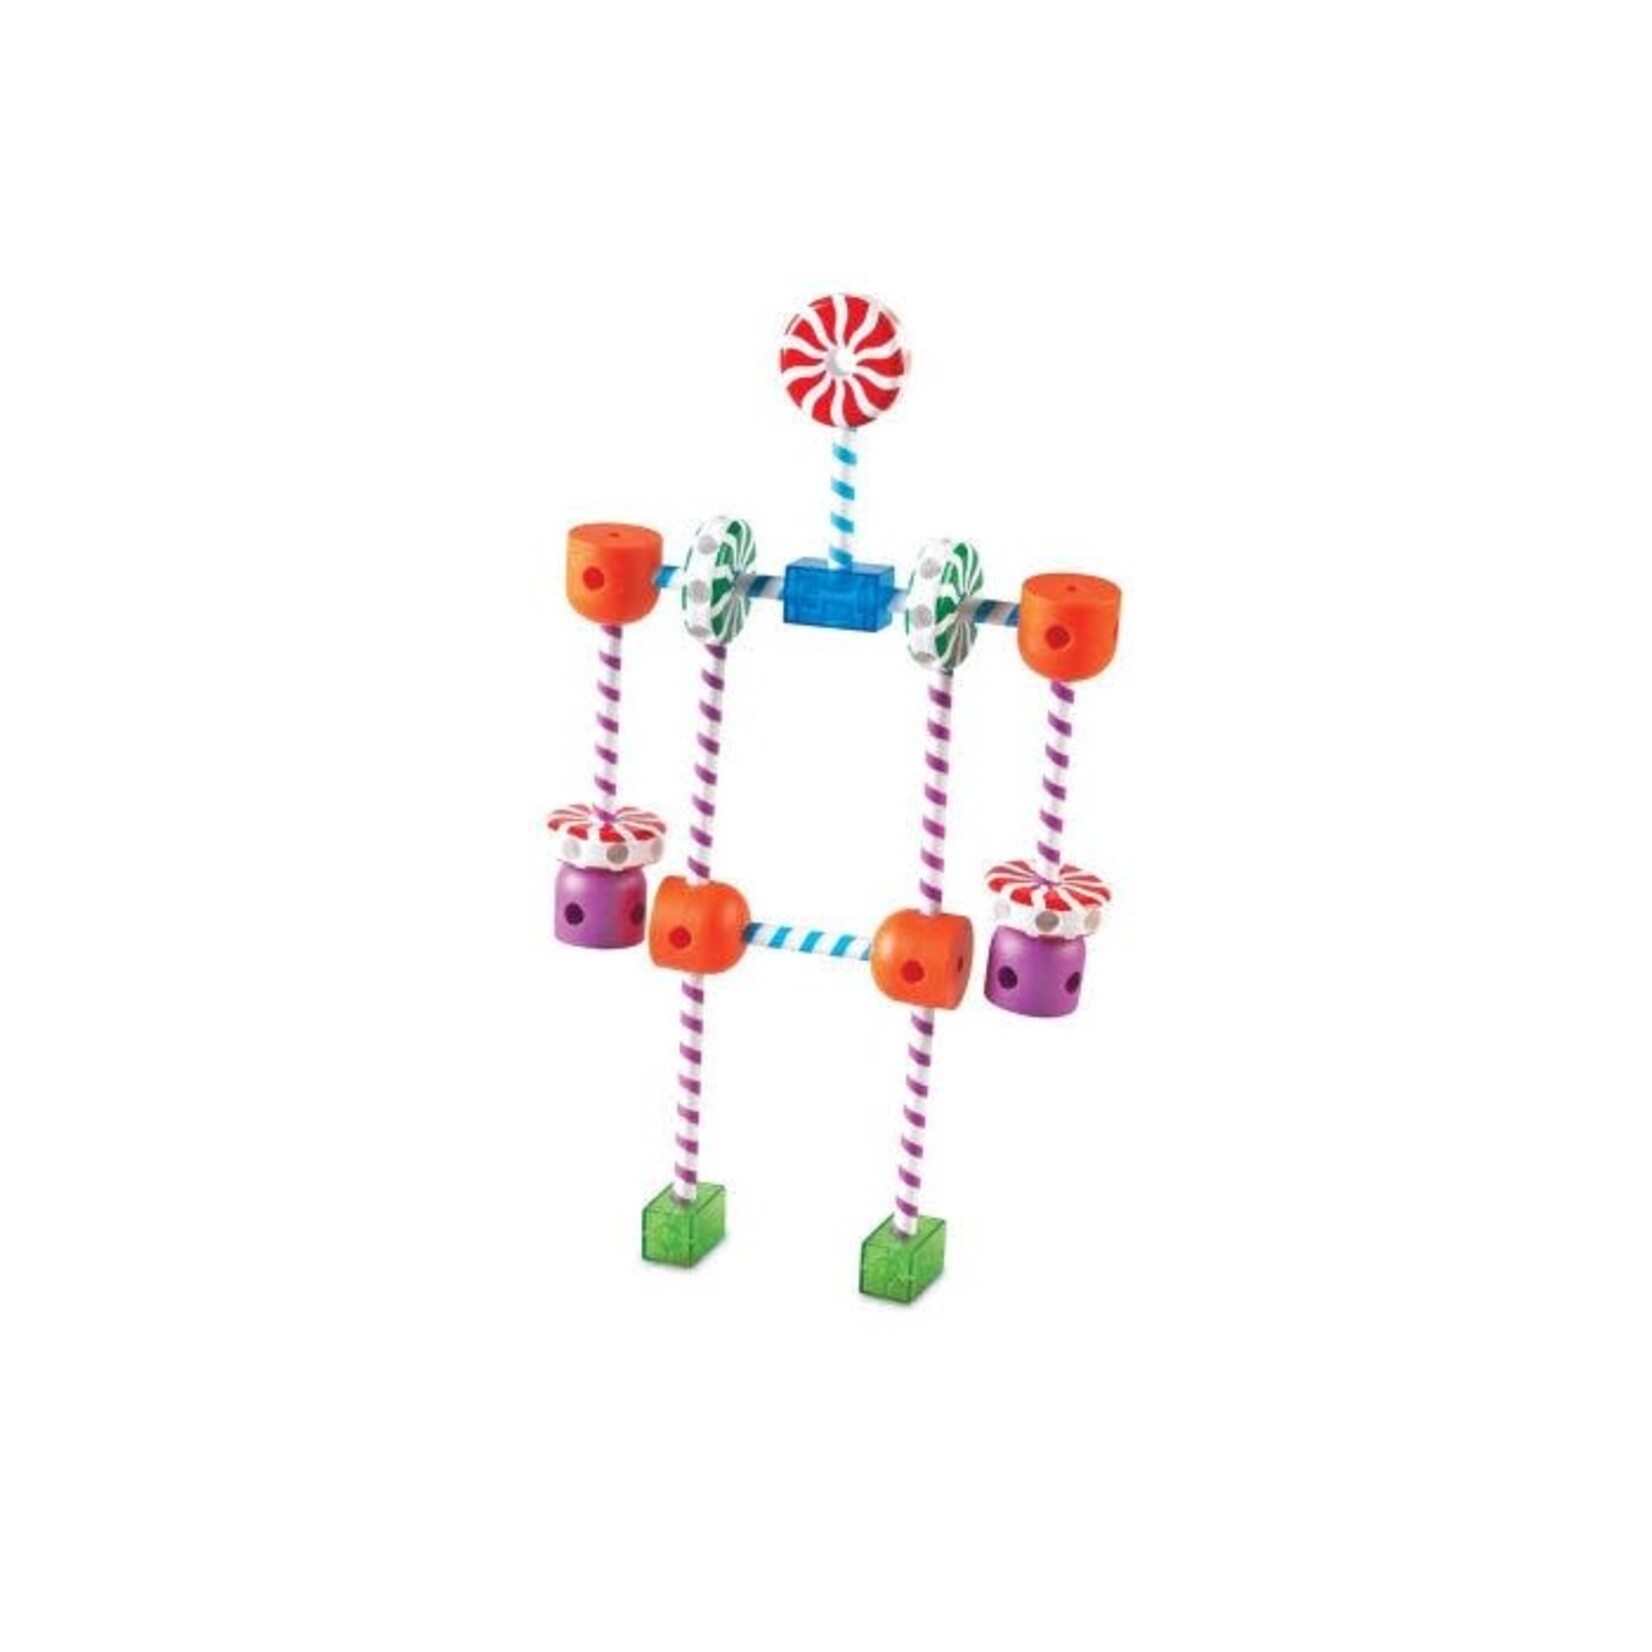 LEARNING RESOURCES INC Candy Construction™ Building Set